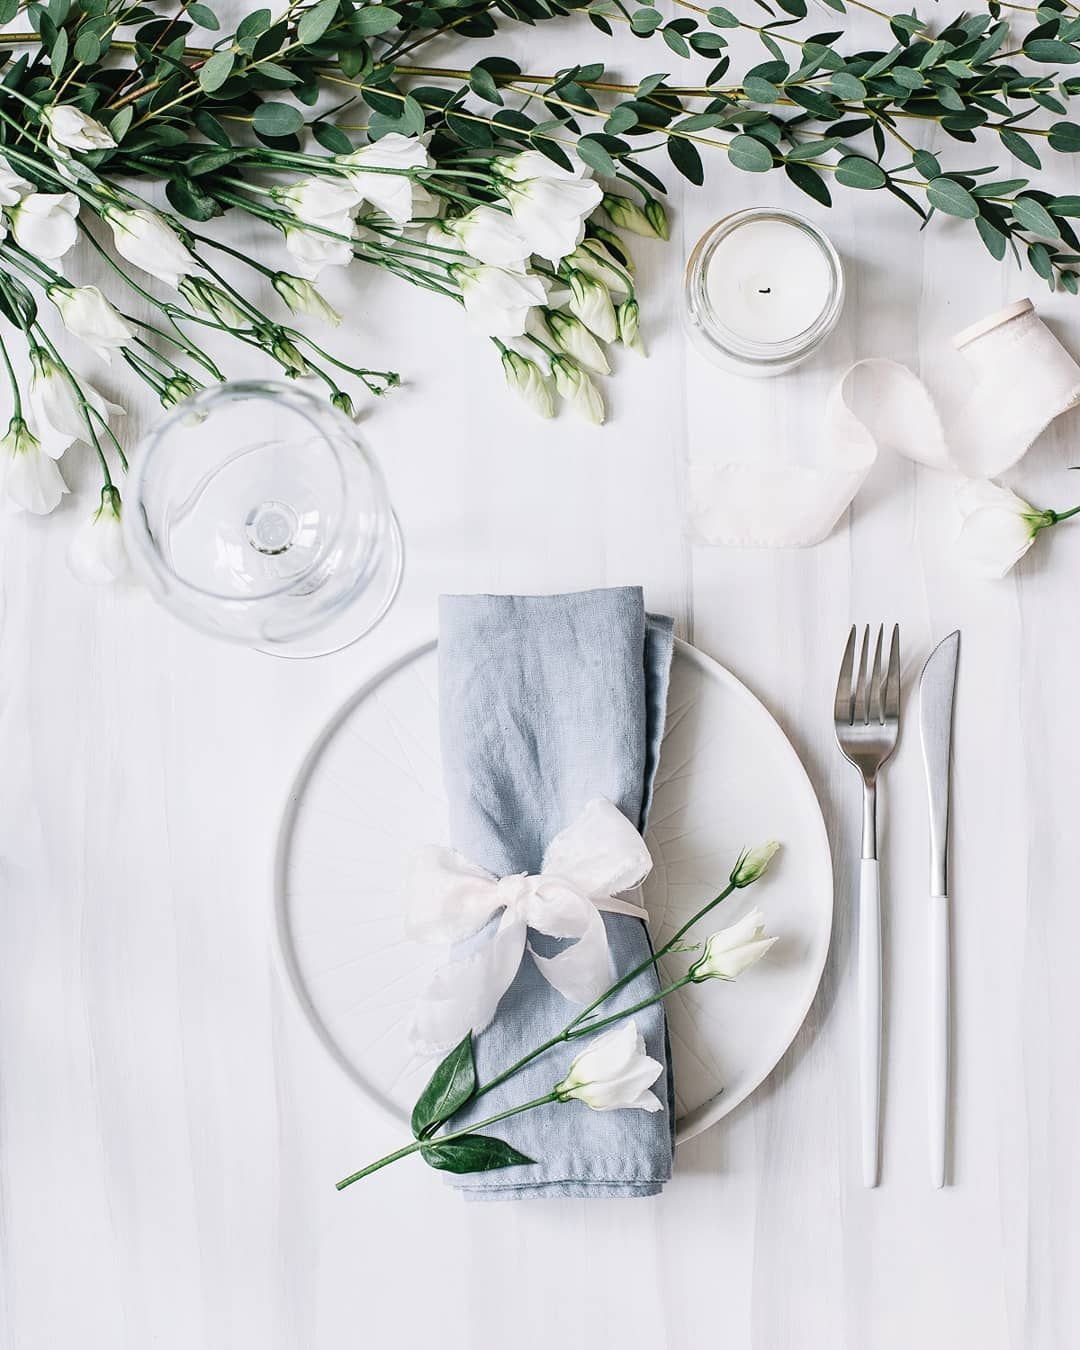 Monogram Disposable Napkins: The 8 Best Ways To Add Elegance To Your Table